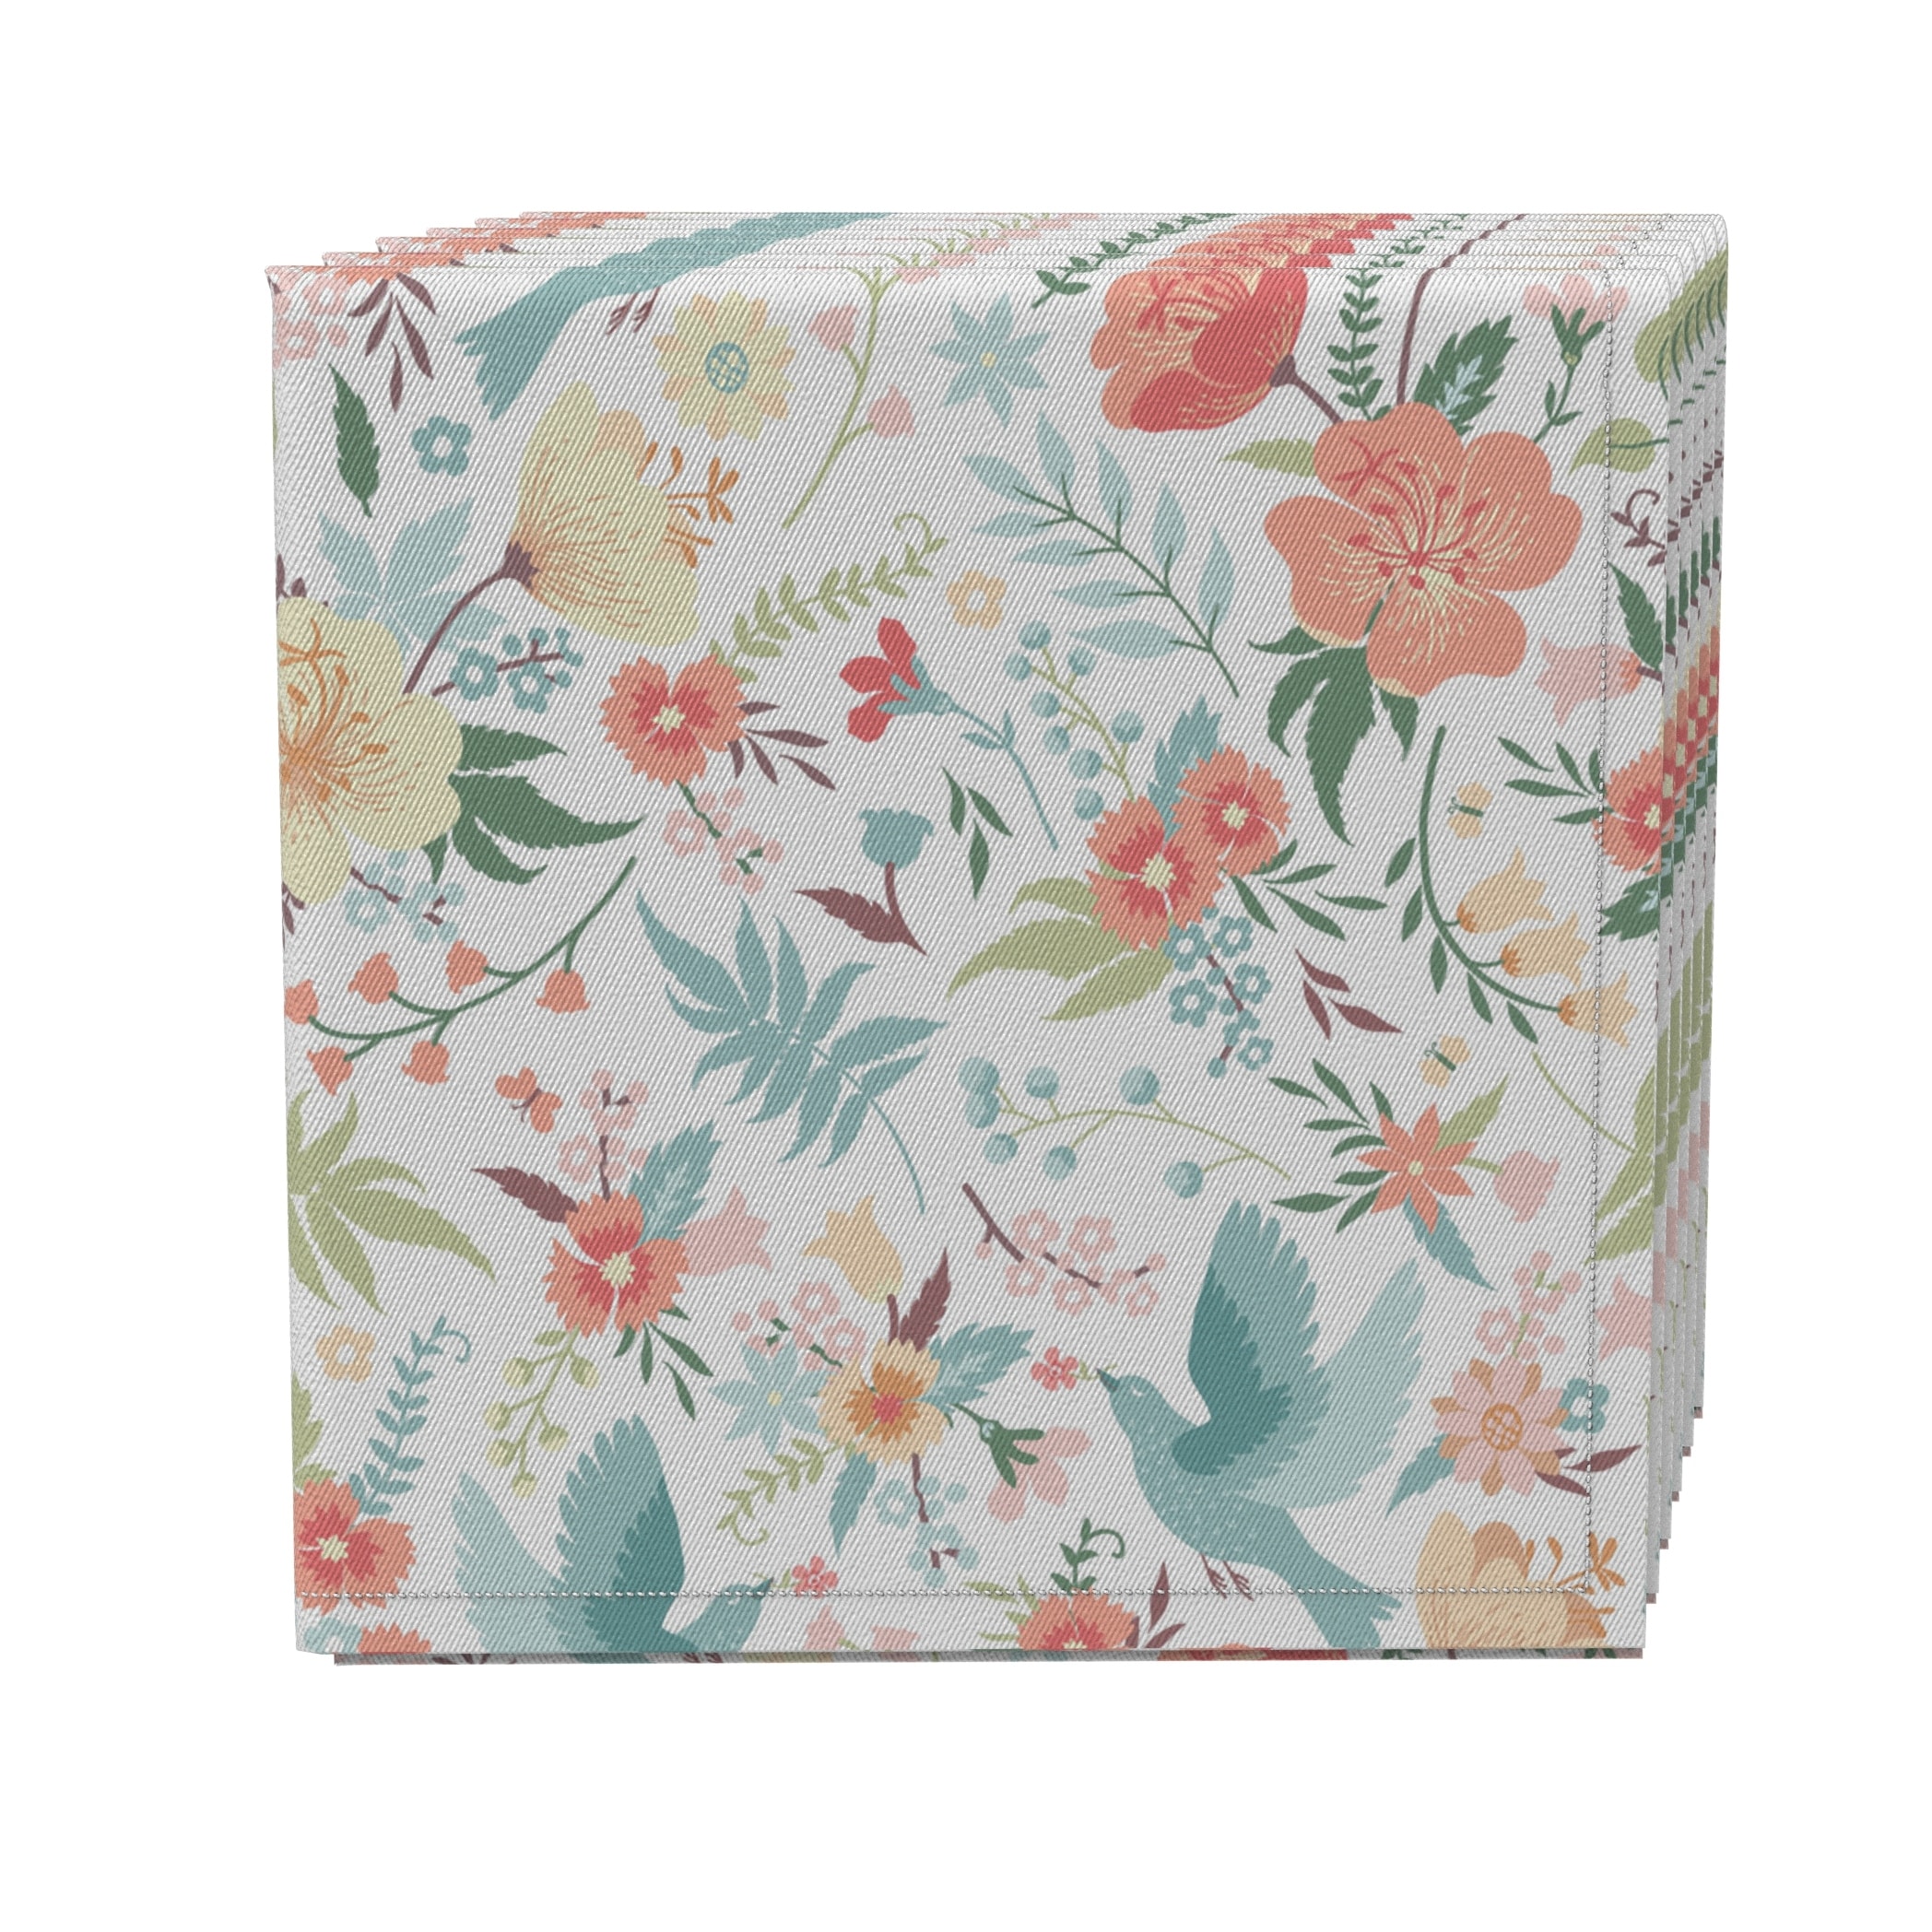 Fabric Textile Products, Inc. Napkin Set of 4, 100% Cotton, 20x20", Summer Style Floral - 20 x 20